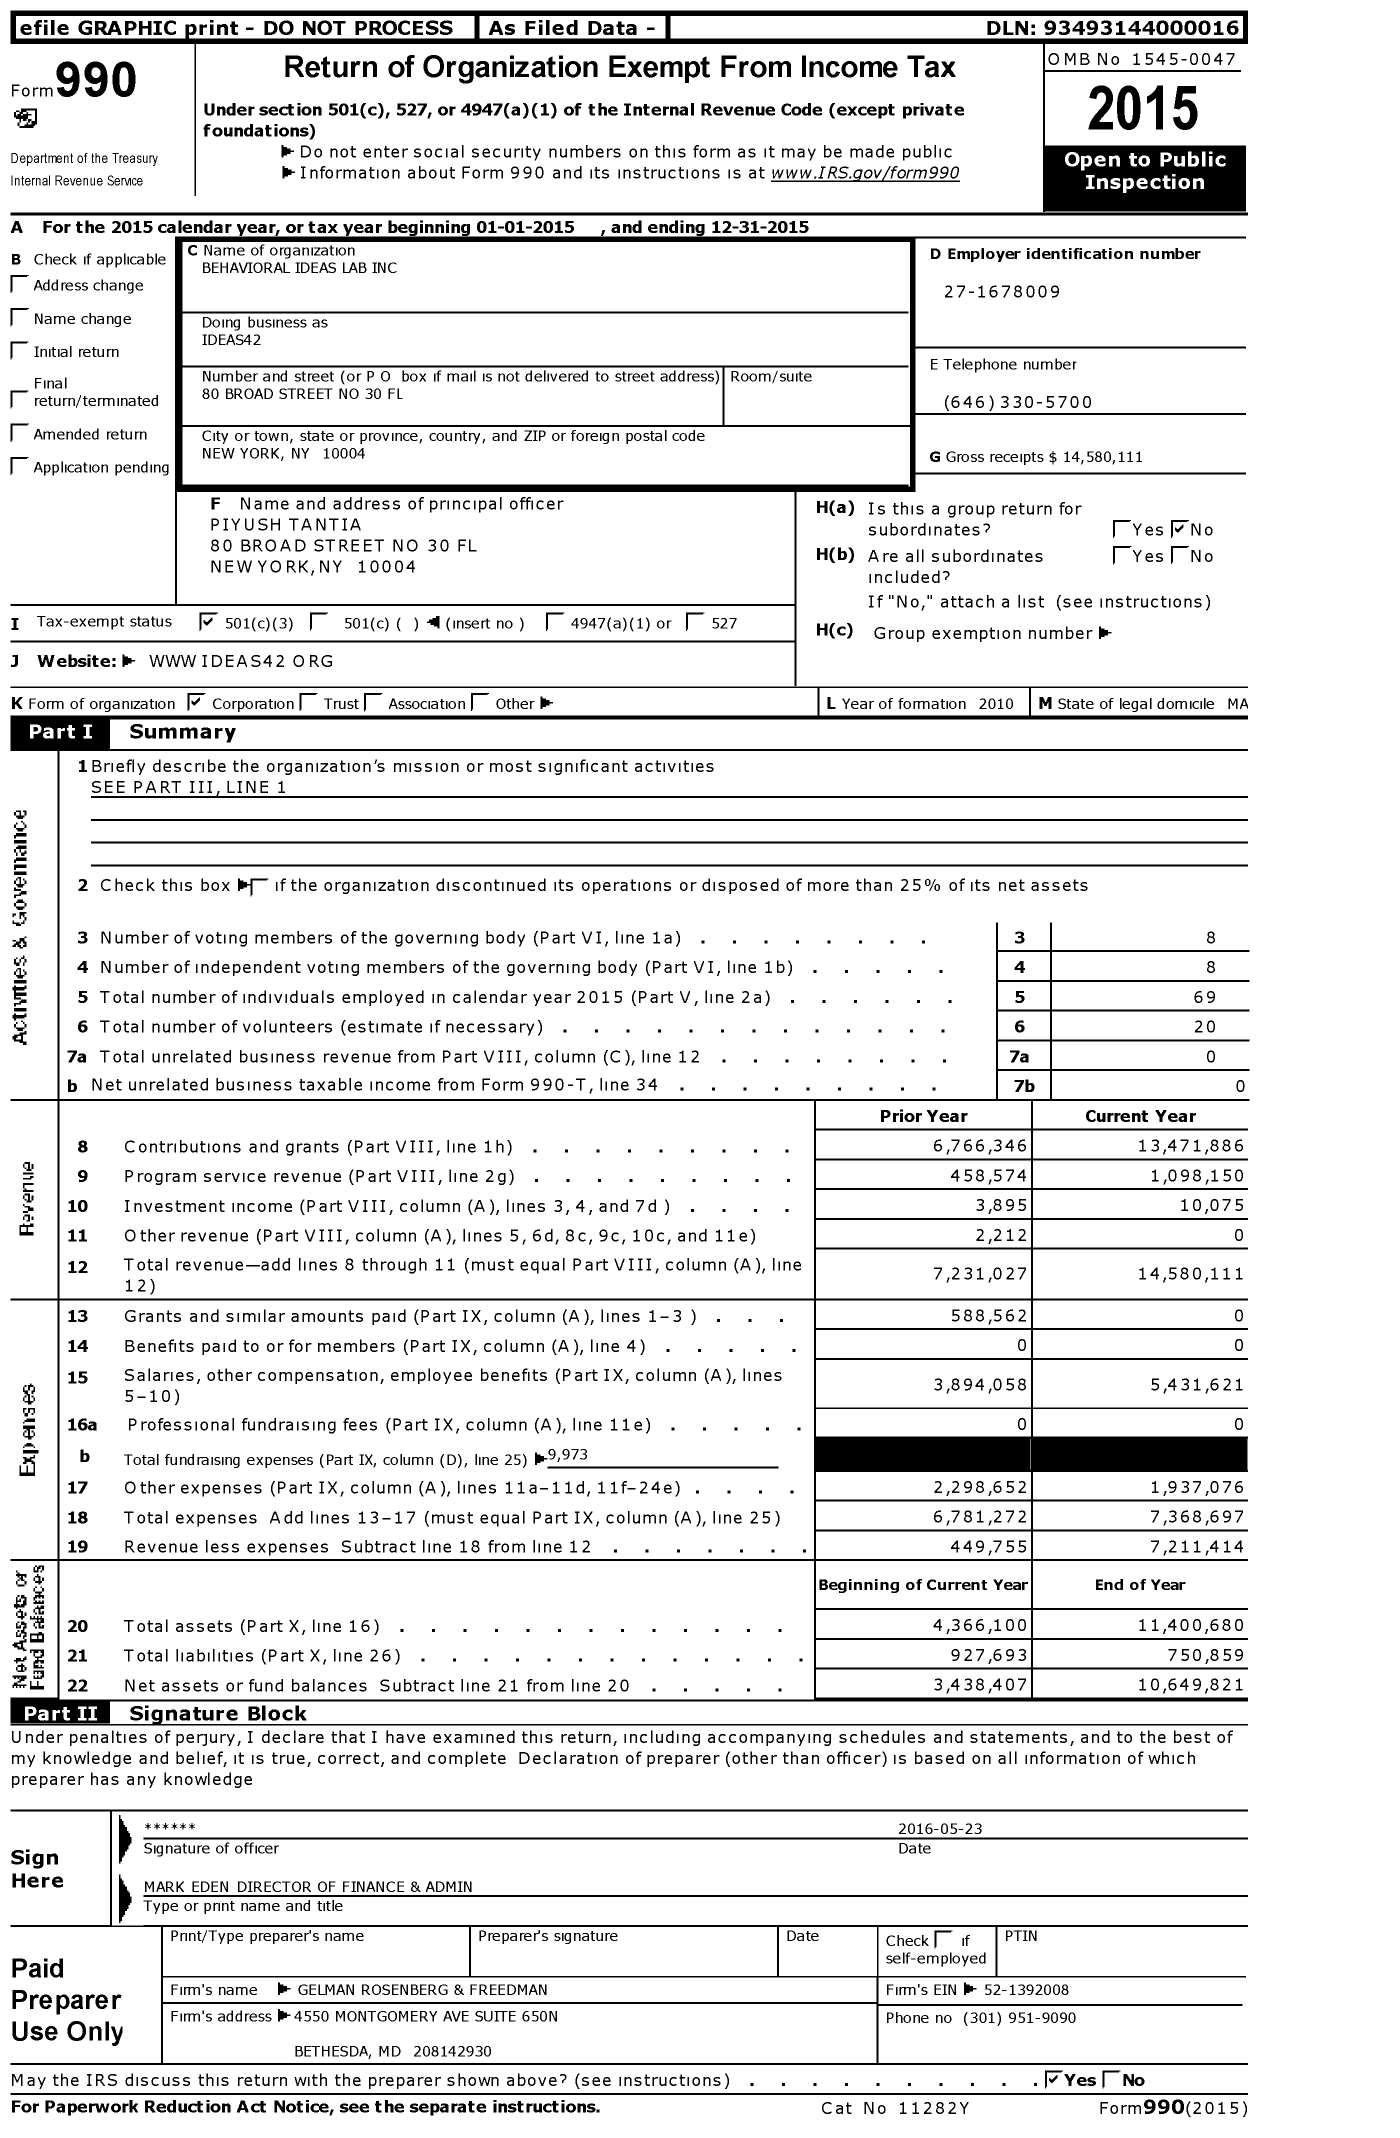 Image of first page of 2015 Form 990 for Ideas42